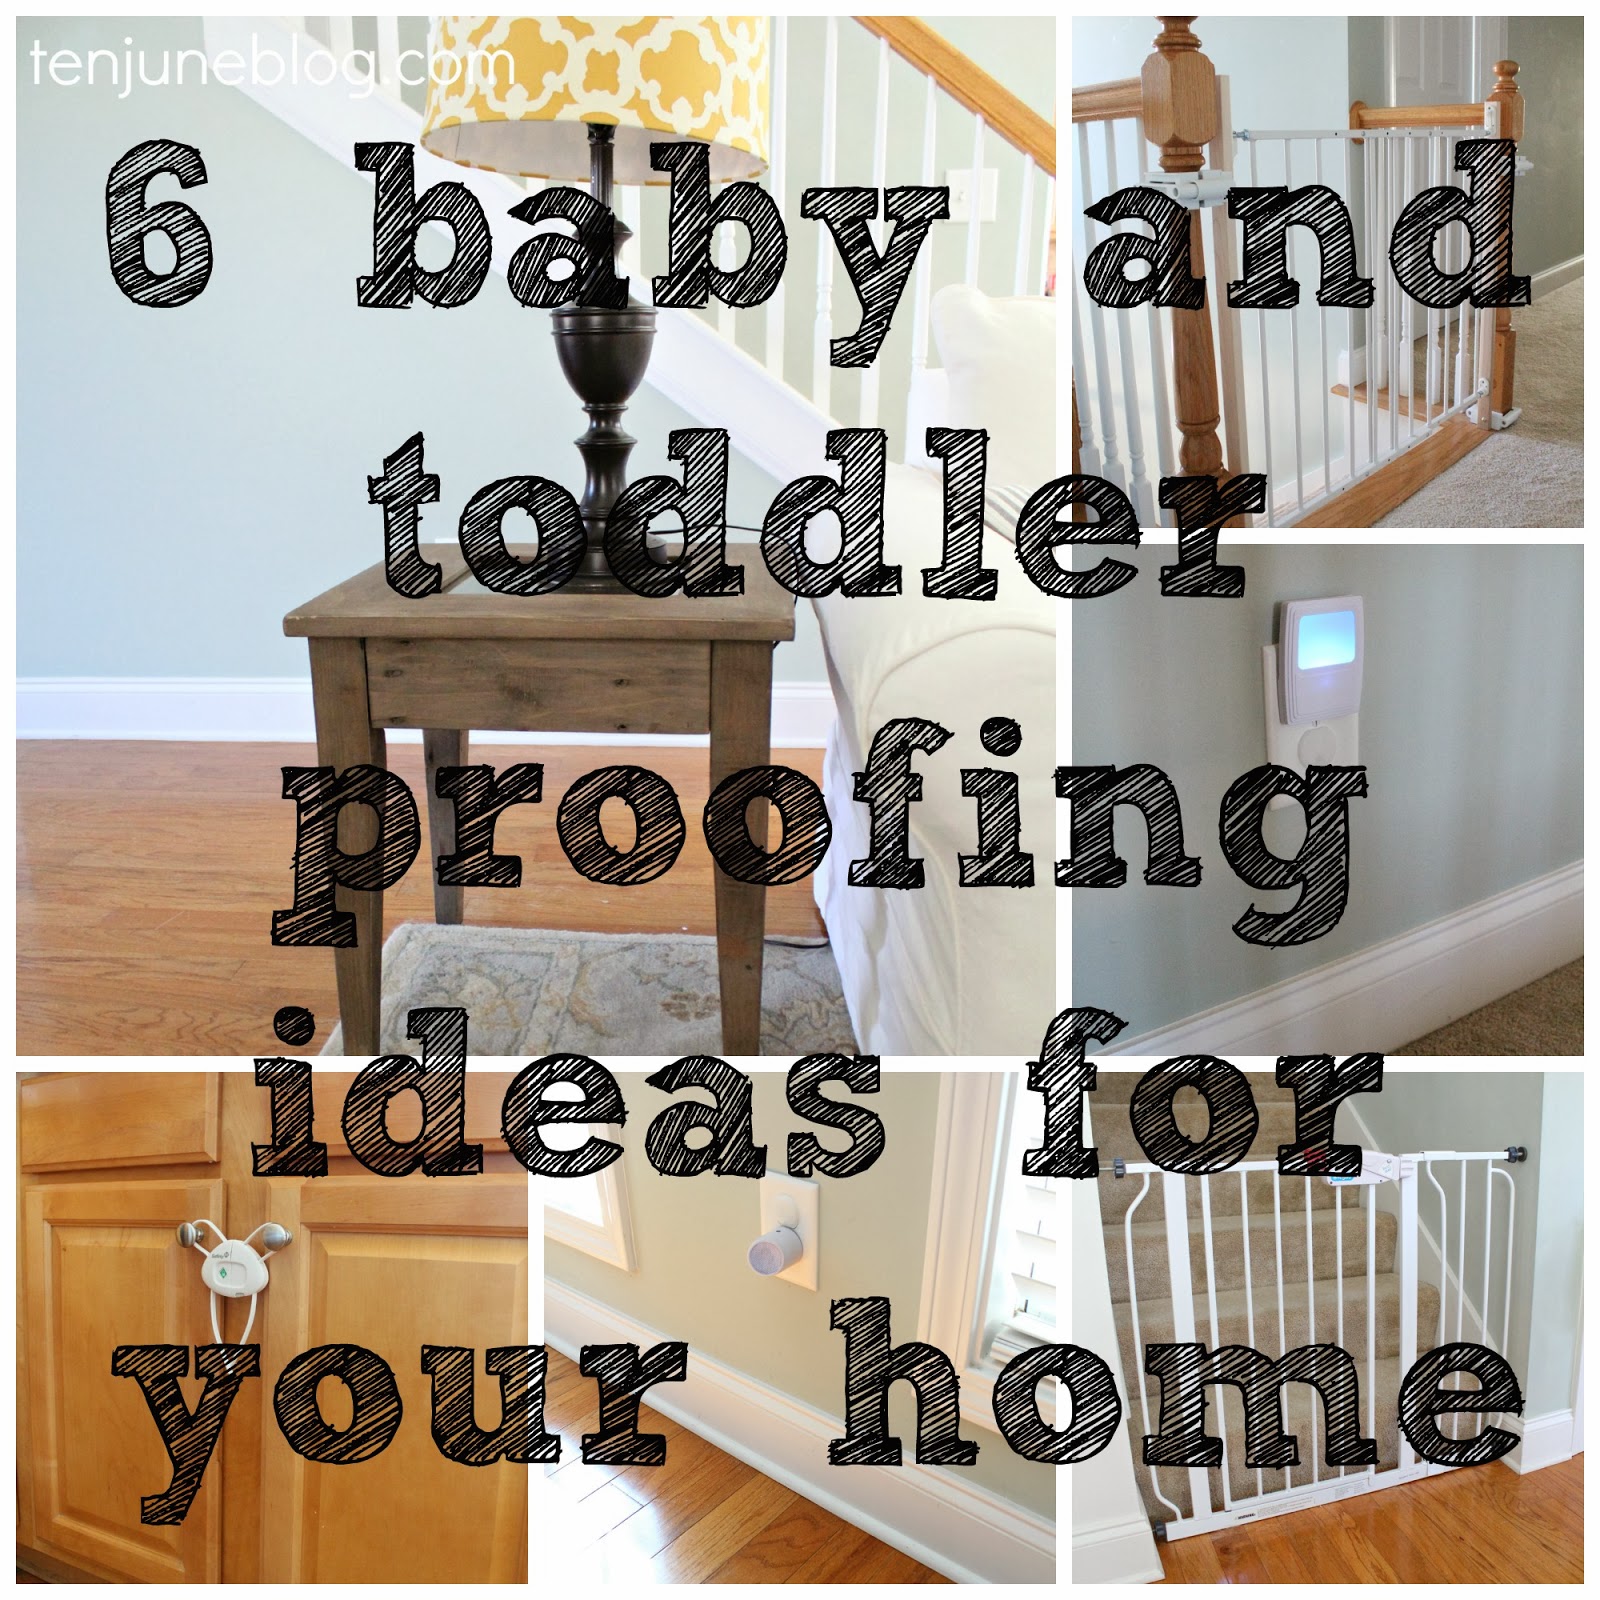 Ten June: Baby And Toddler Proofing Ideas For Your Home